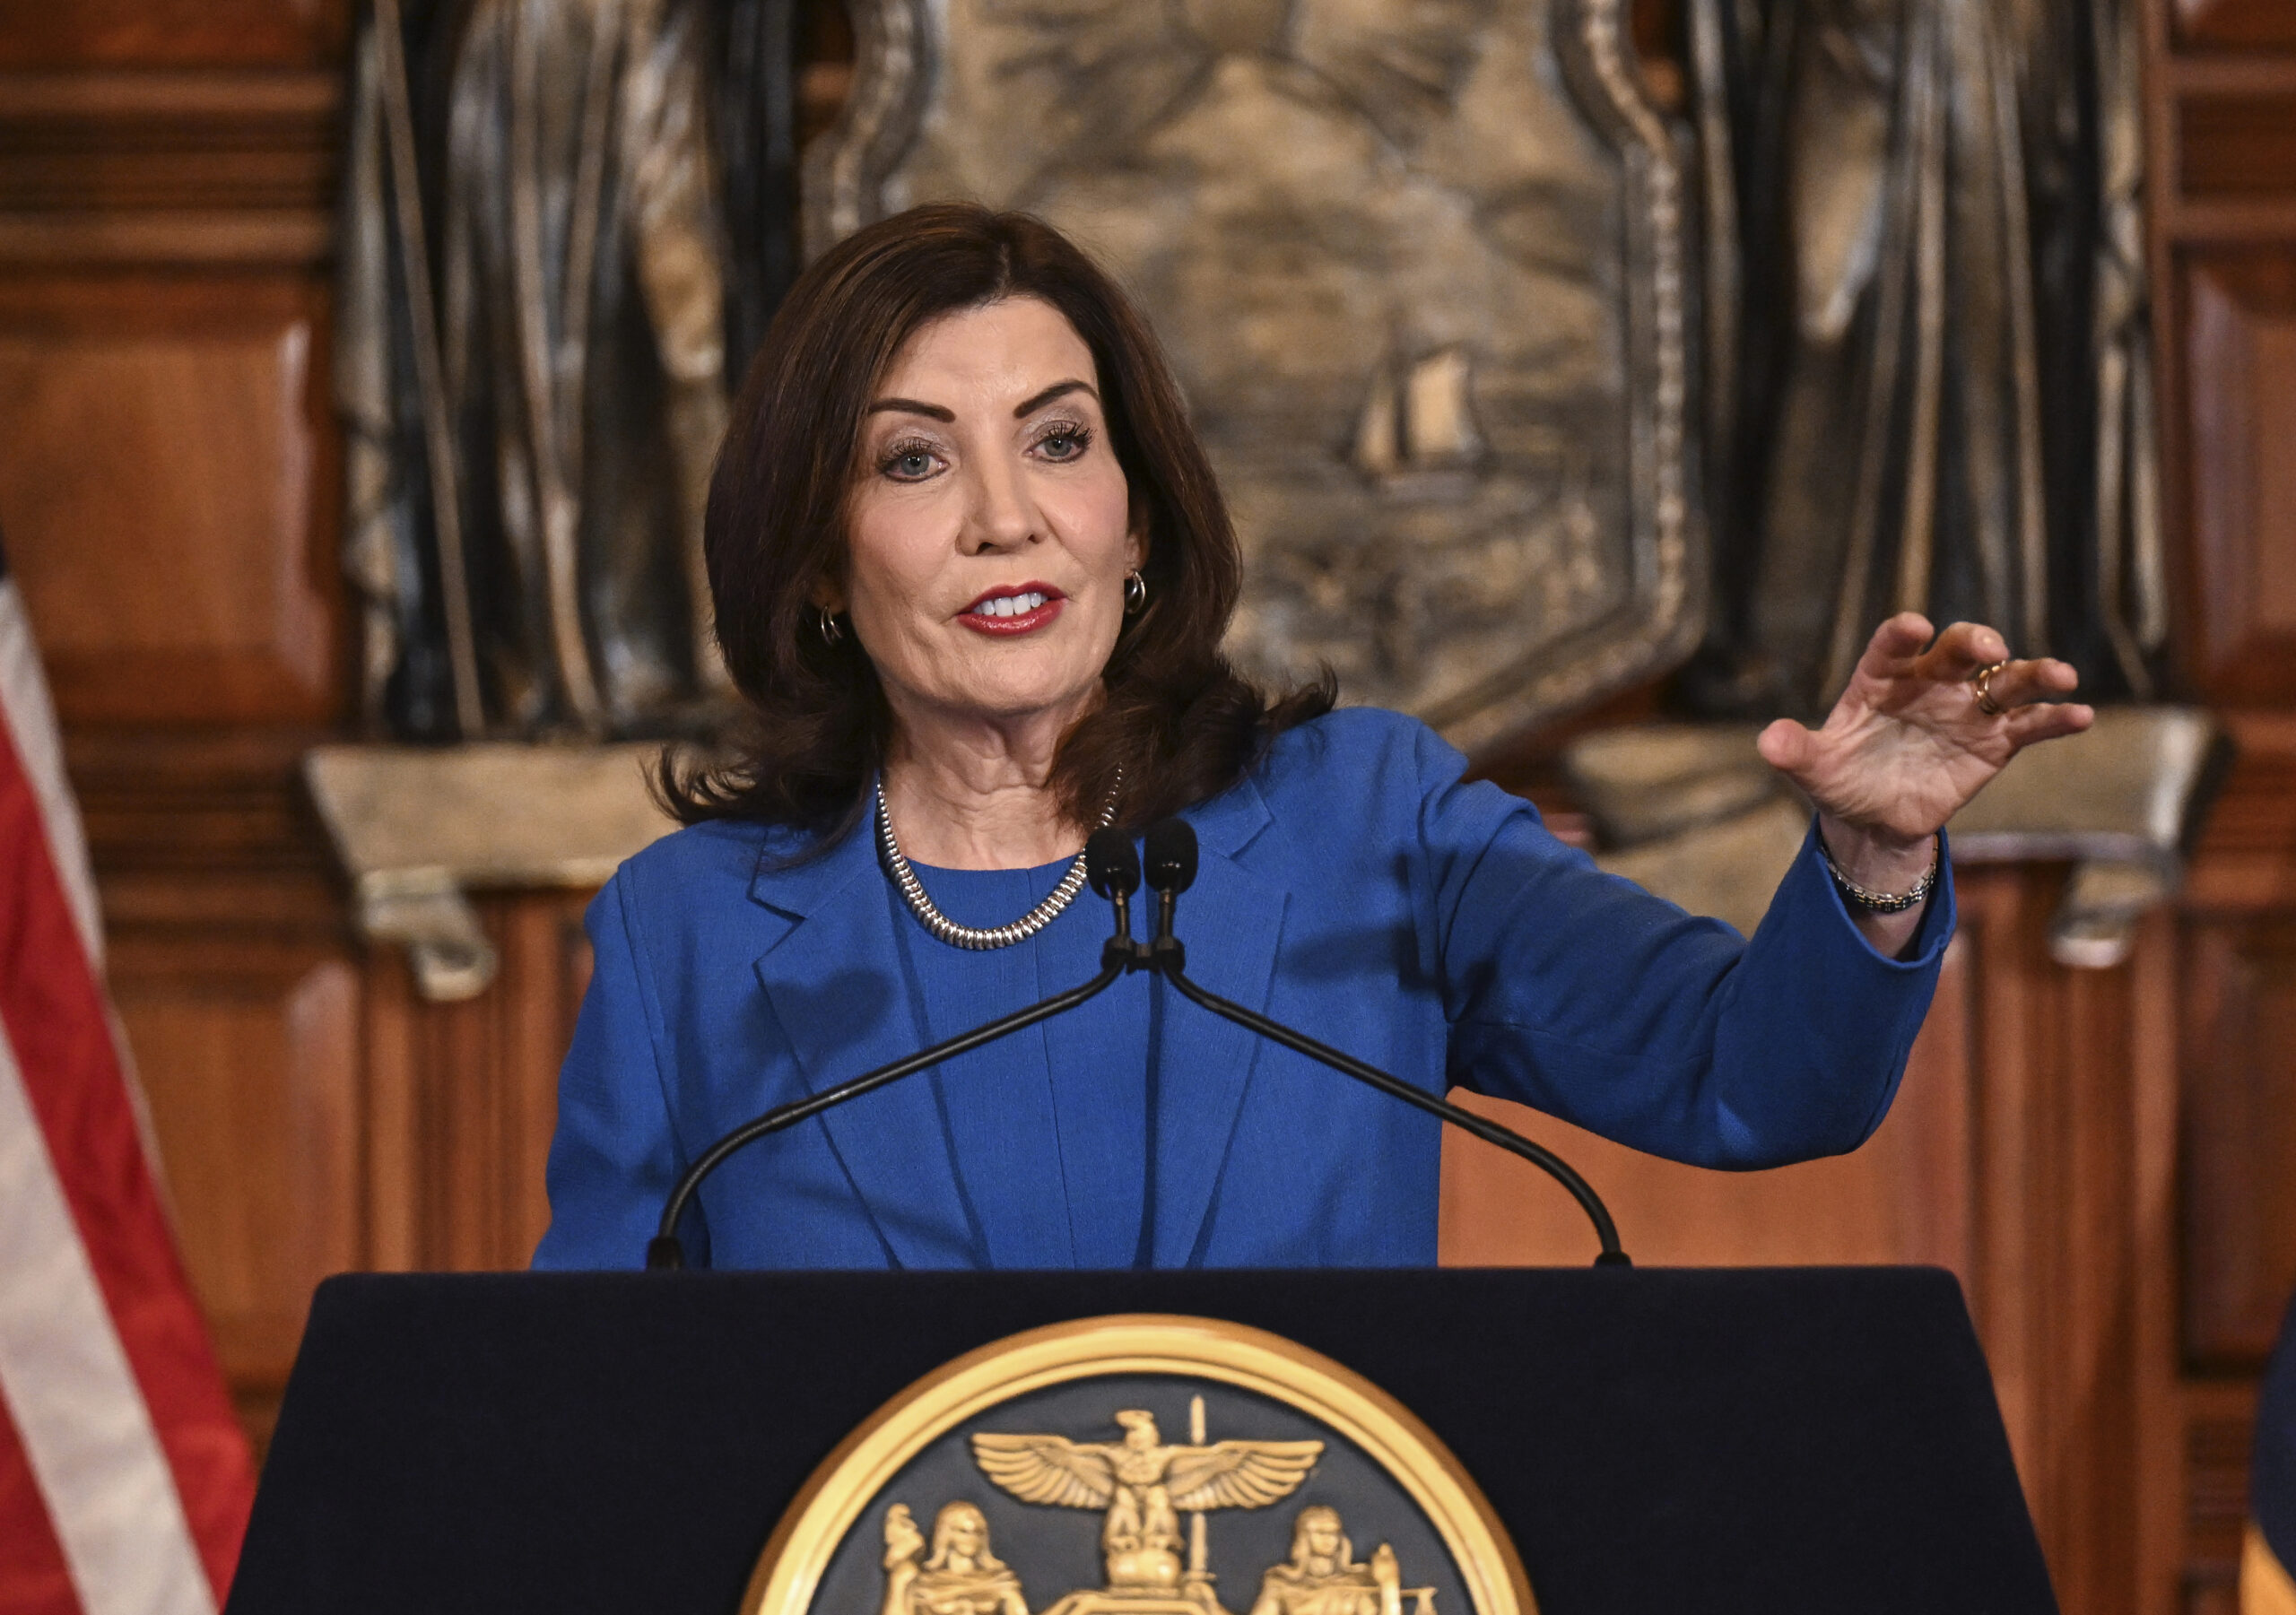 Backlash over Hochul’s attempt to divert $120m from legal aid fund